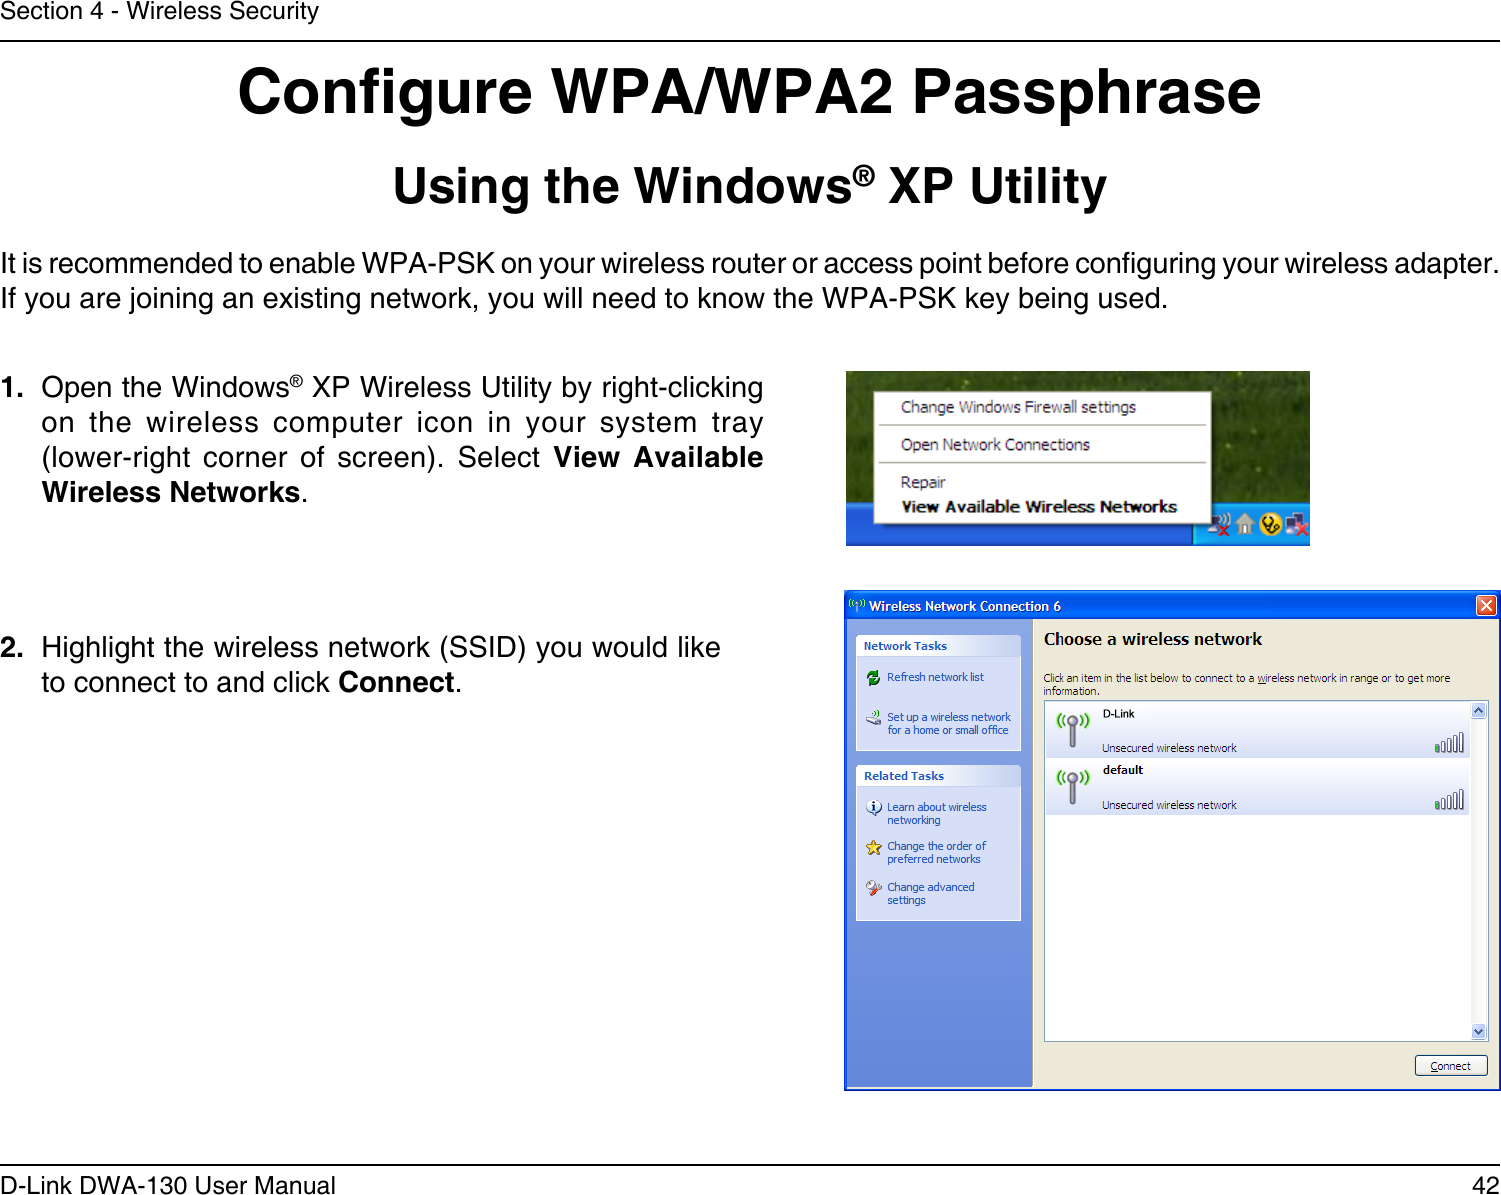 42D-Link DWA-130 User ManualSection 4 - Wireless SecurityCongure WPA/WPA2 PassphraseUsing the Windows® XP UtilityIt is recommended to enable WPA-PSK on your wireless router or access point before conguring your wireless adapter. If you are joining an existing network, you will need to know the WPA-PSK key being used.2.  Highlight the wireless network (SSID) you would like to connect to and click Connect.1.  Open the Windows® XP Wireless Utility by right-clicking on  the  wireless  computer  icon  in  your  system  tray  (lower-right  corner  of  screen).  Select  View  Available Wireless Networks. 